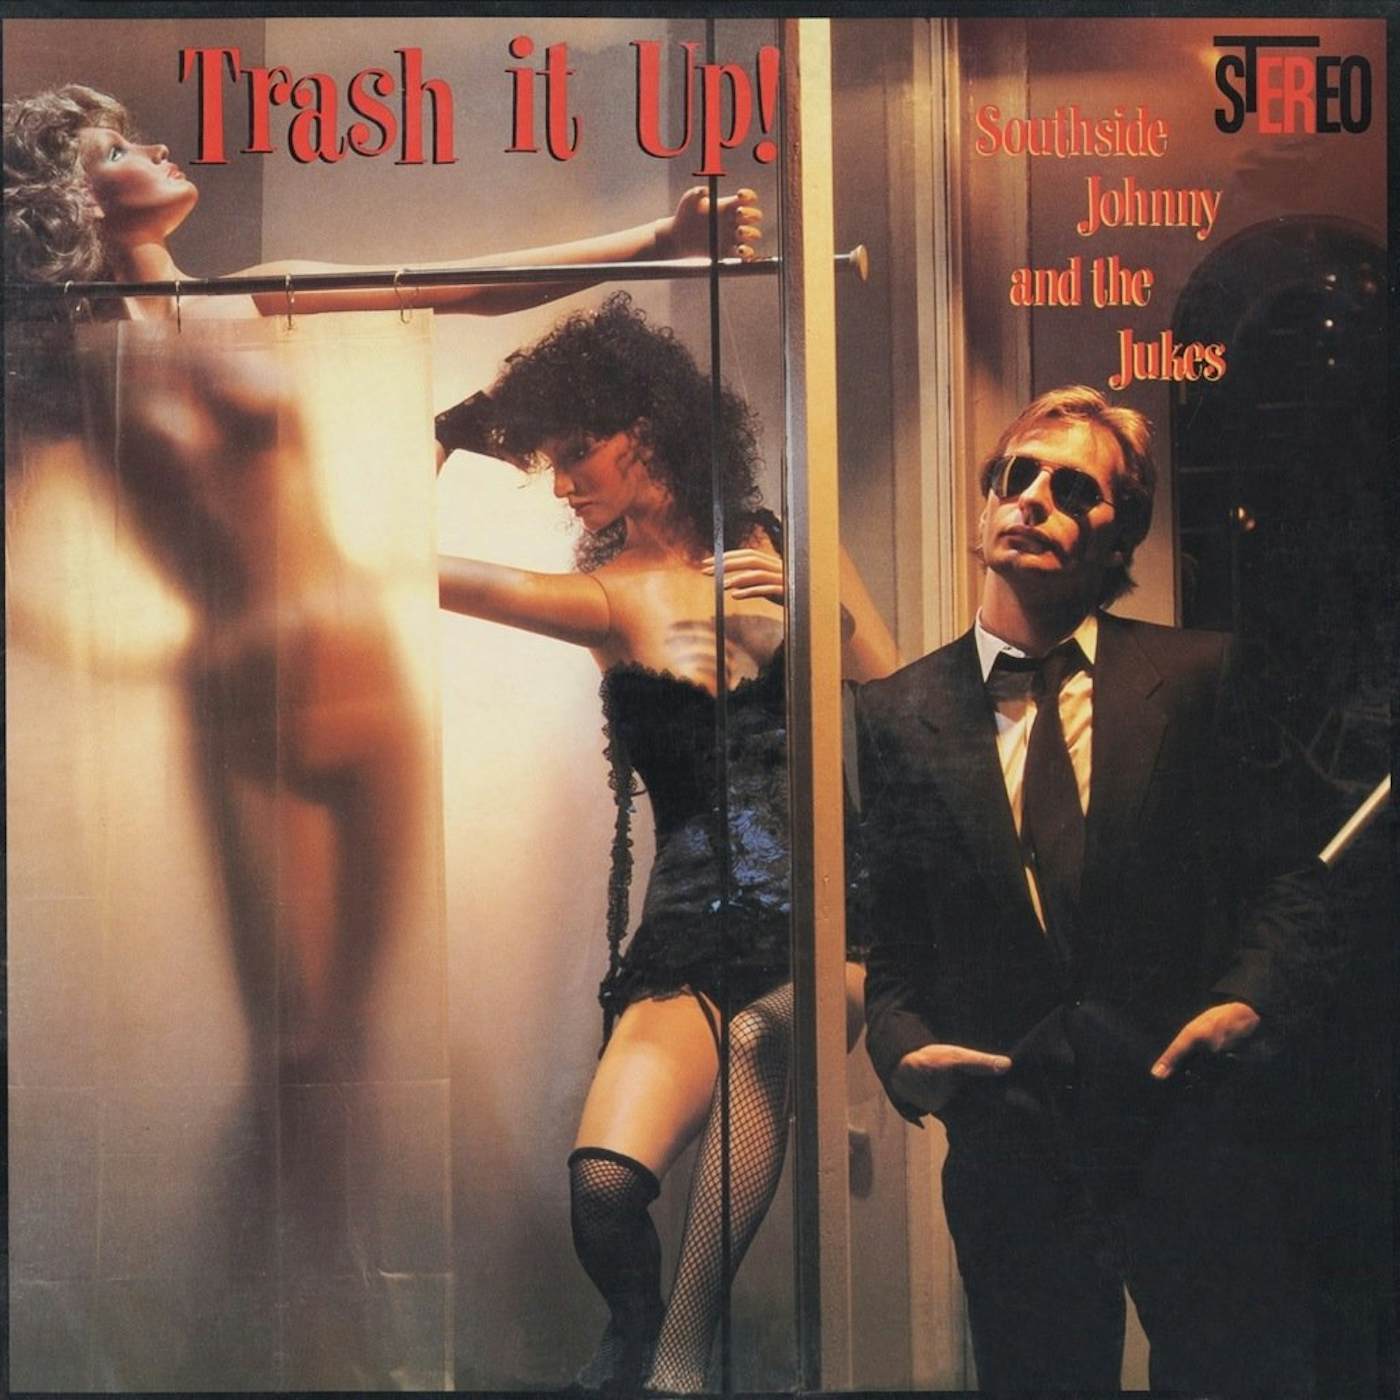 Southside Johnny And The Asbury Jukes - Trash It Up